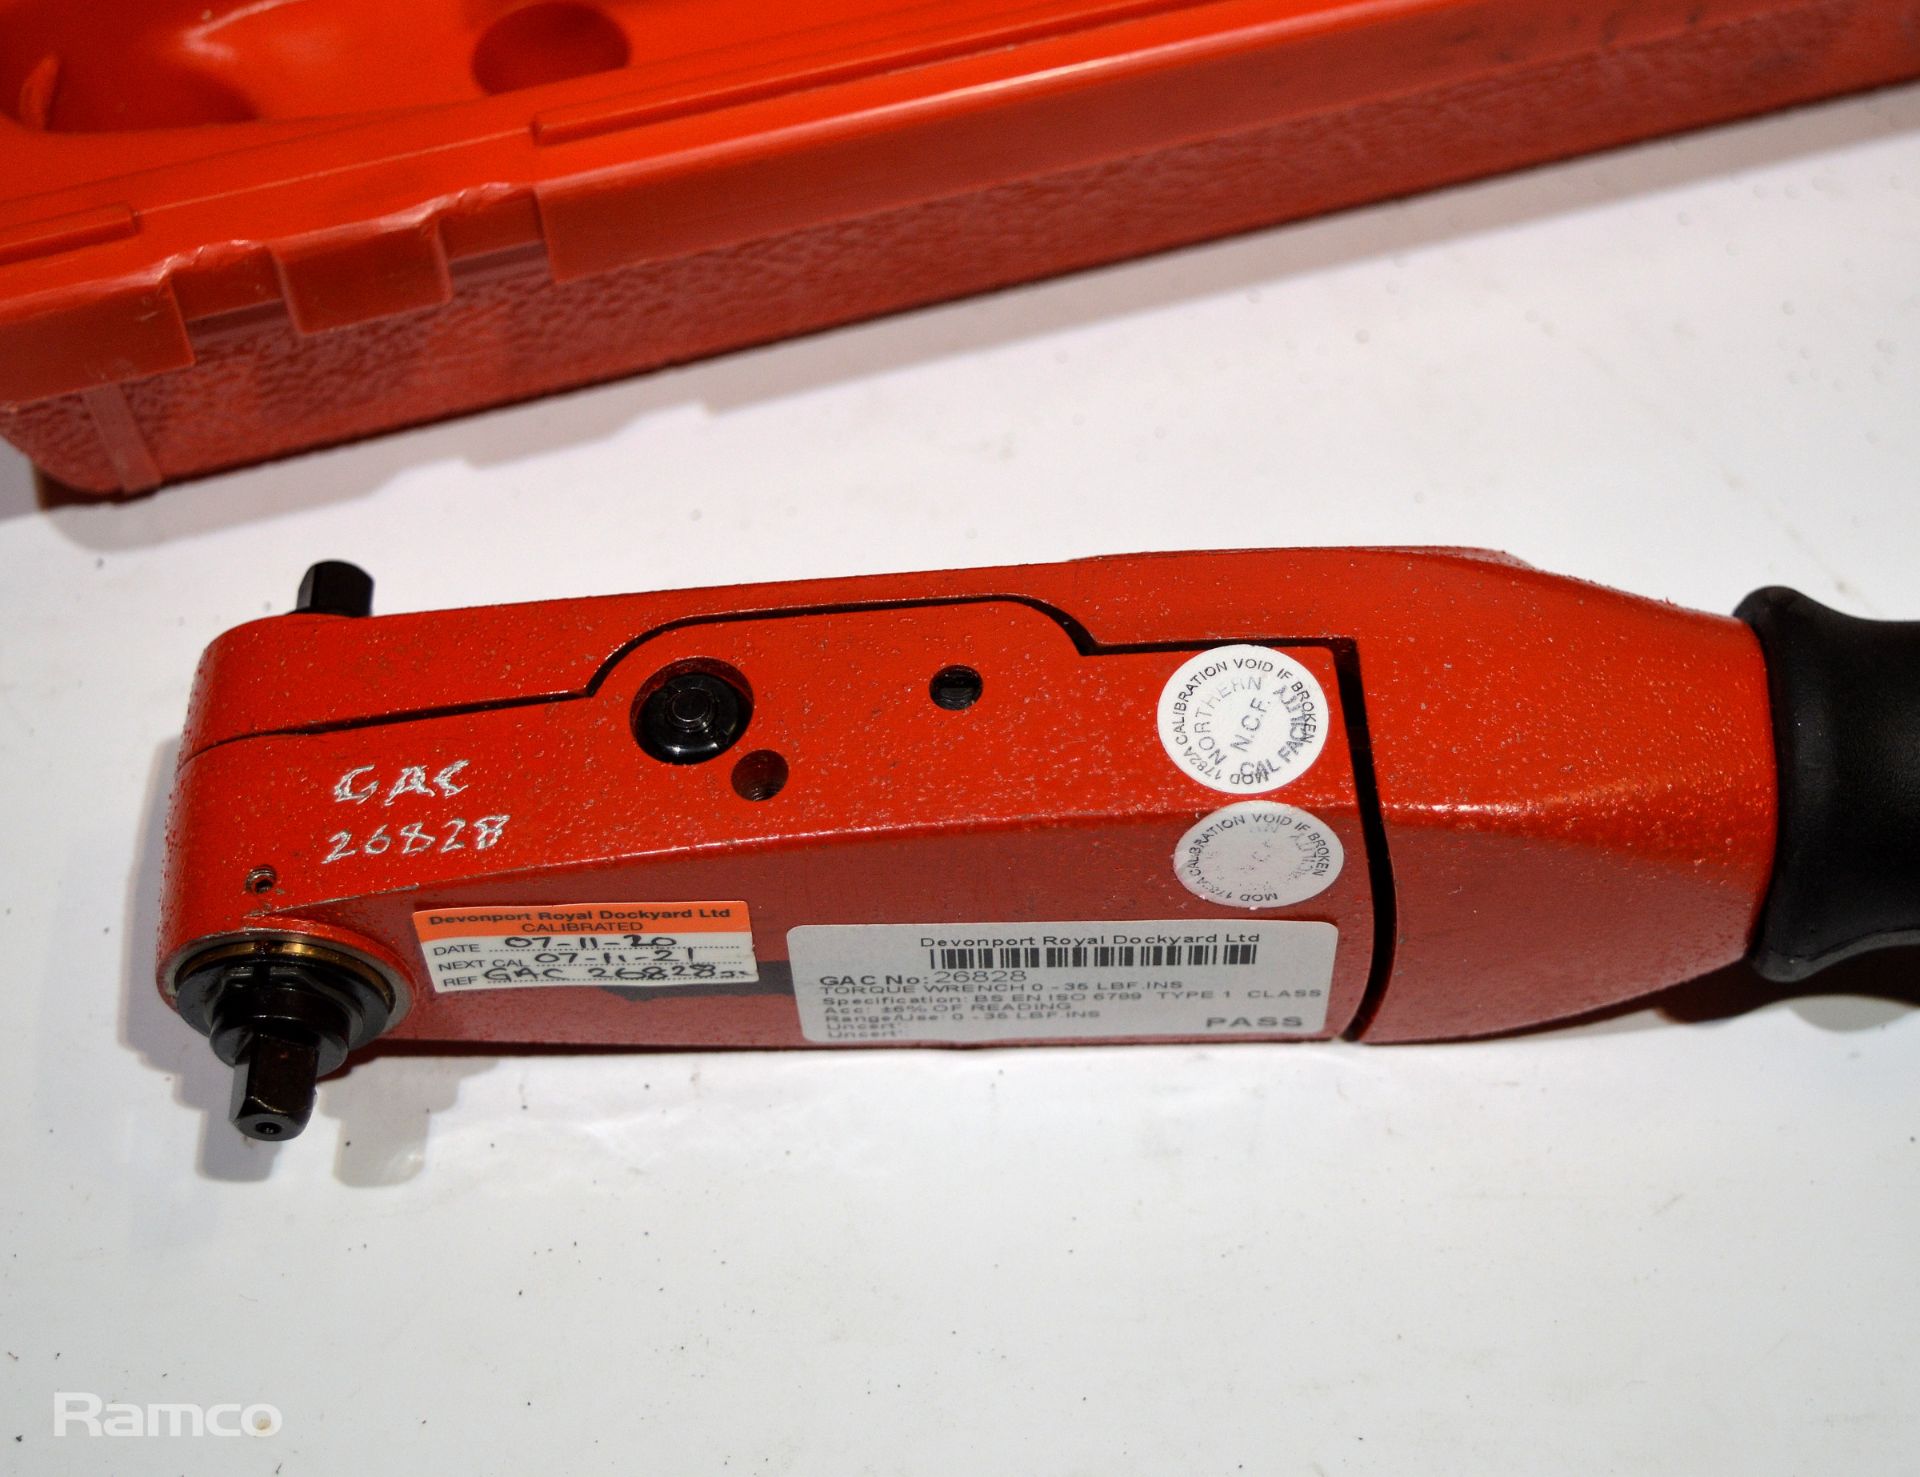 Torqueleader dial measuring torque wrench 0-35Lbs - Image 2 of 2